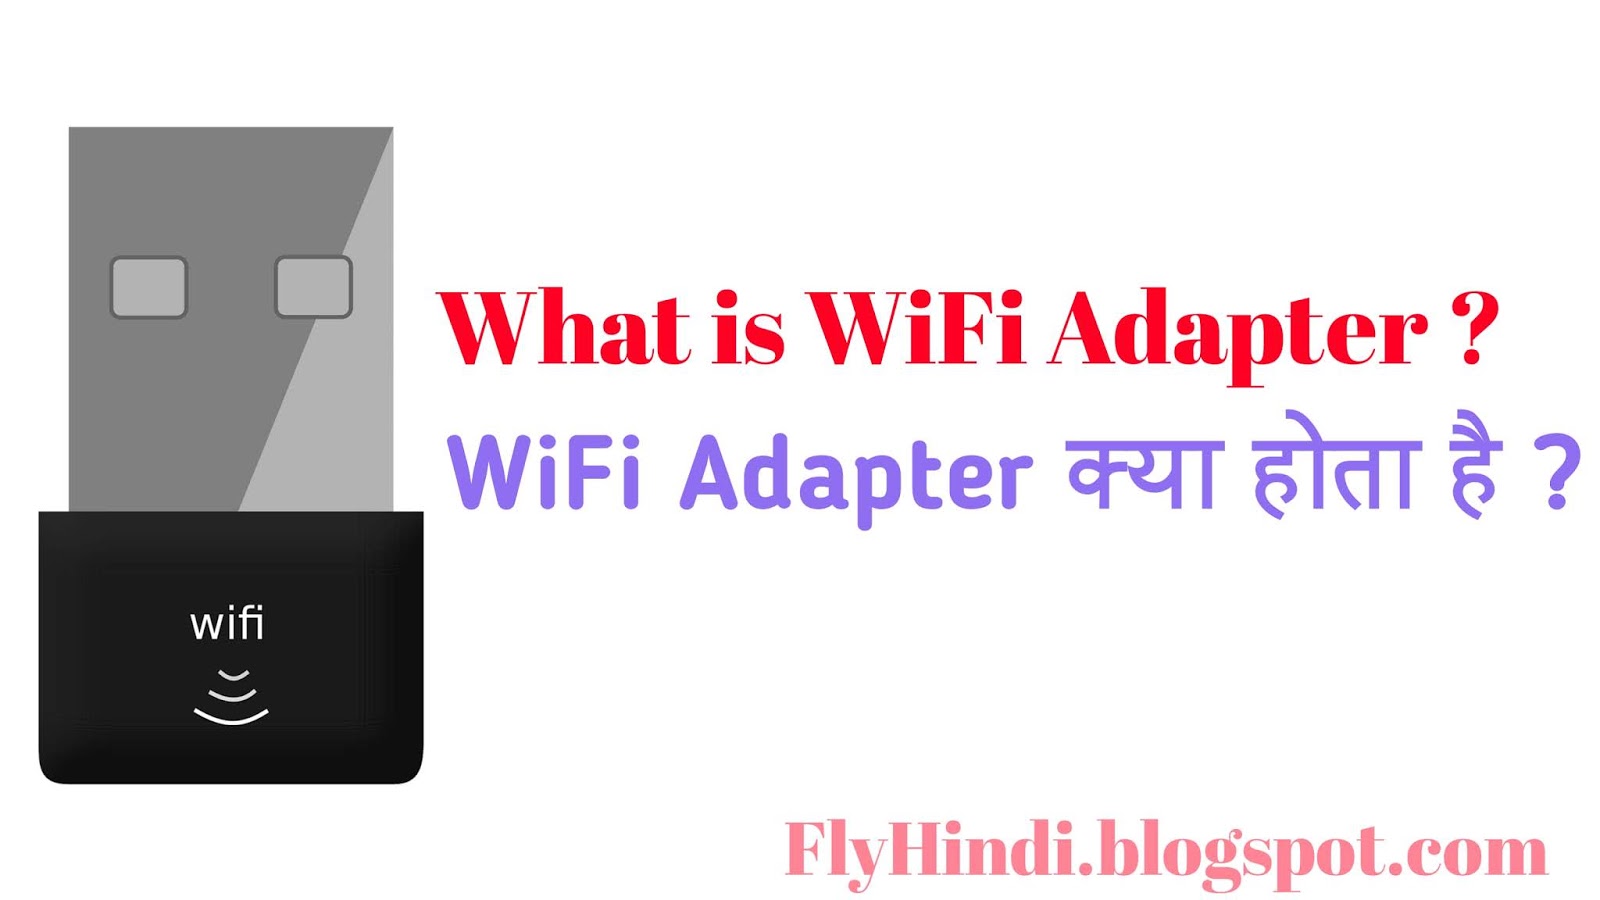 You are currently viewing Wifi Adapter kya hota hai ? What is Wifi Adapter in Hindi